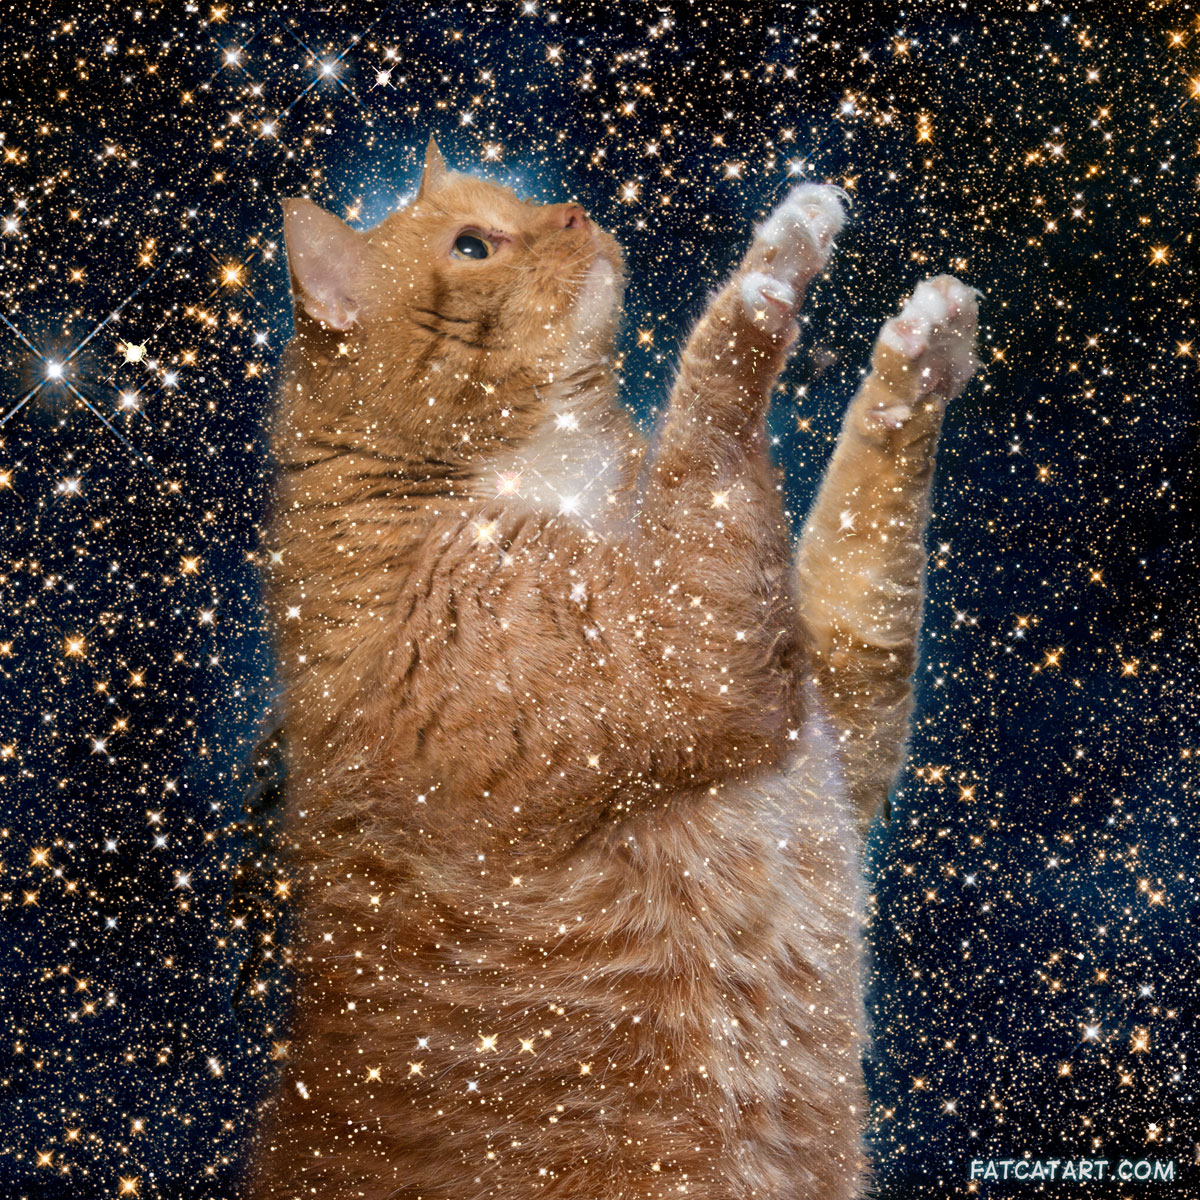 The Celestial Cat in the Pillars of Creation, in infrared